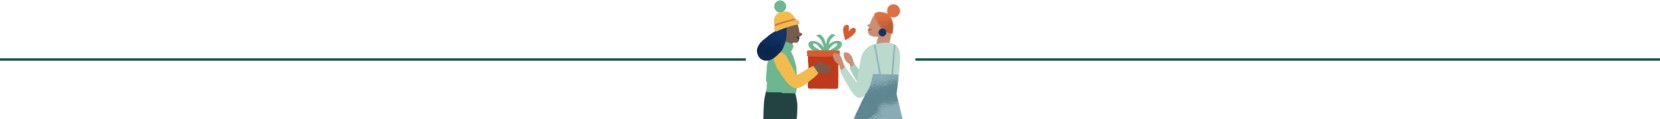 Holiday illustration of two people opening a gift